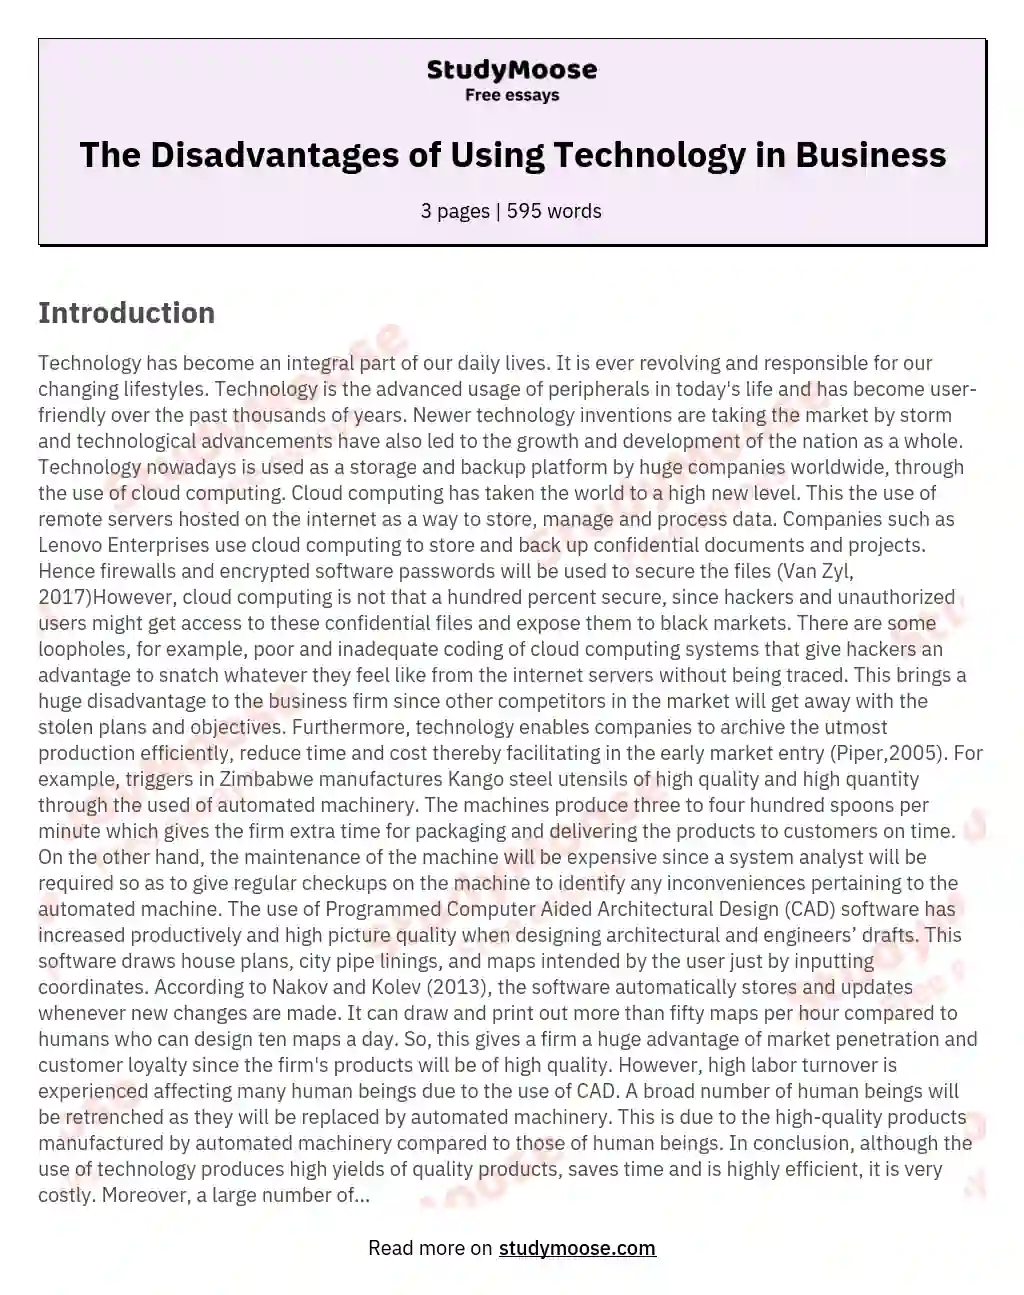 The Disadvantages of Using Technology in Business essay